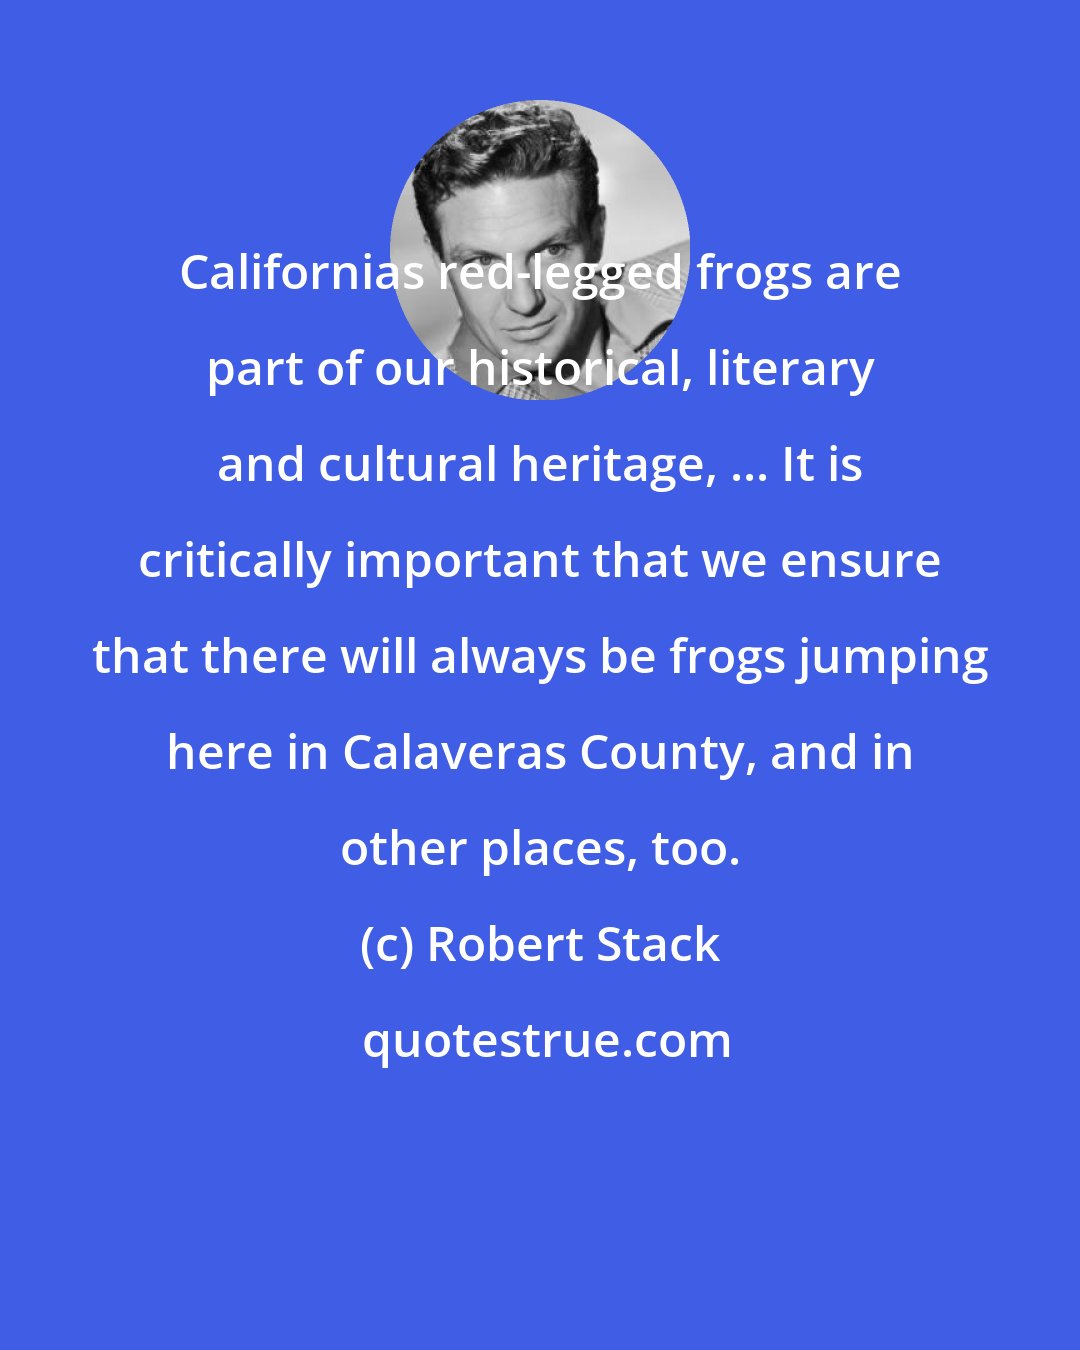 Robert Stack: Californias red-legged frogs are part of our historical, literary and cultural heritage, ... It is critically important that we ensure that there will always be frogs jumping here in Calaveras County, and in other places, too.